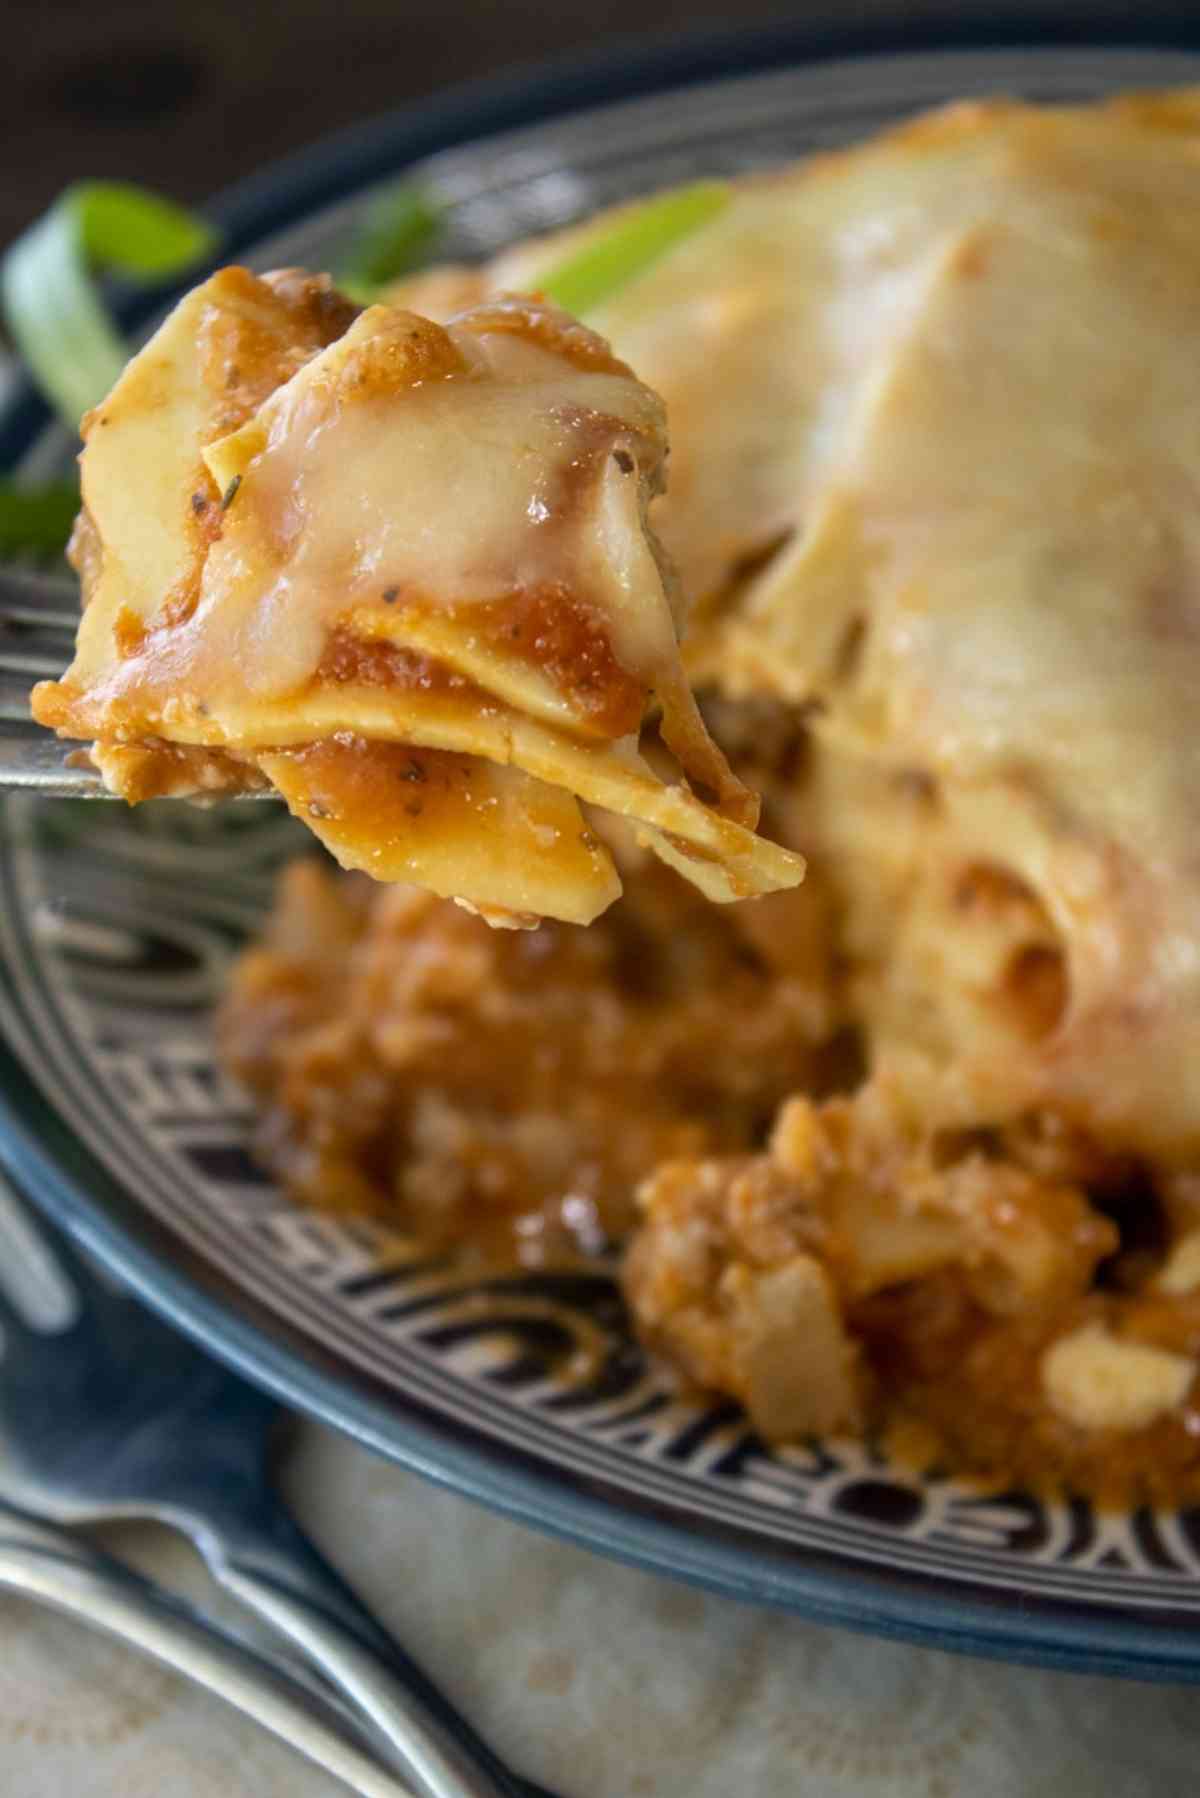 Classic Lasagna cooked in a crockpot!